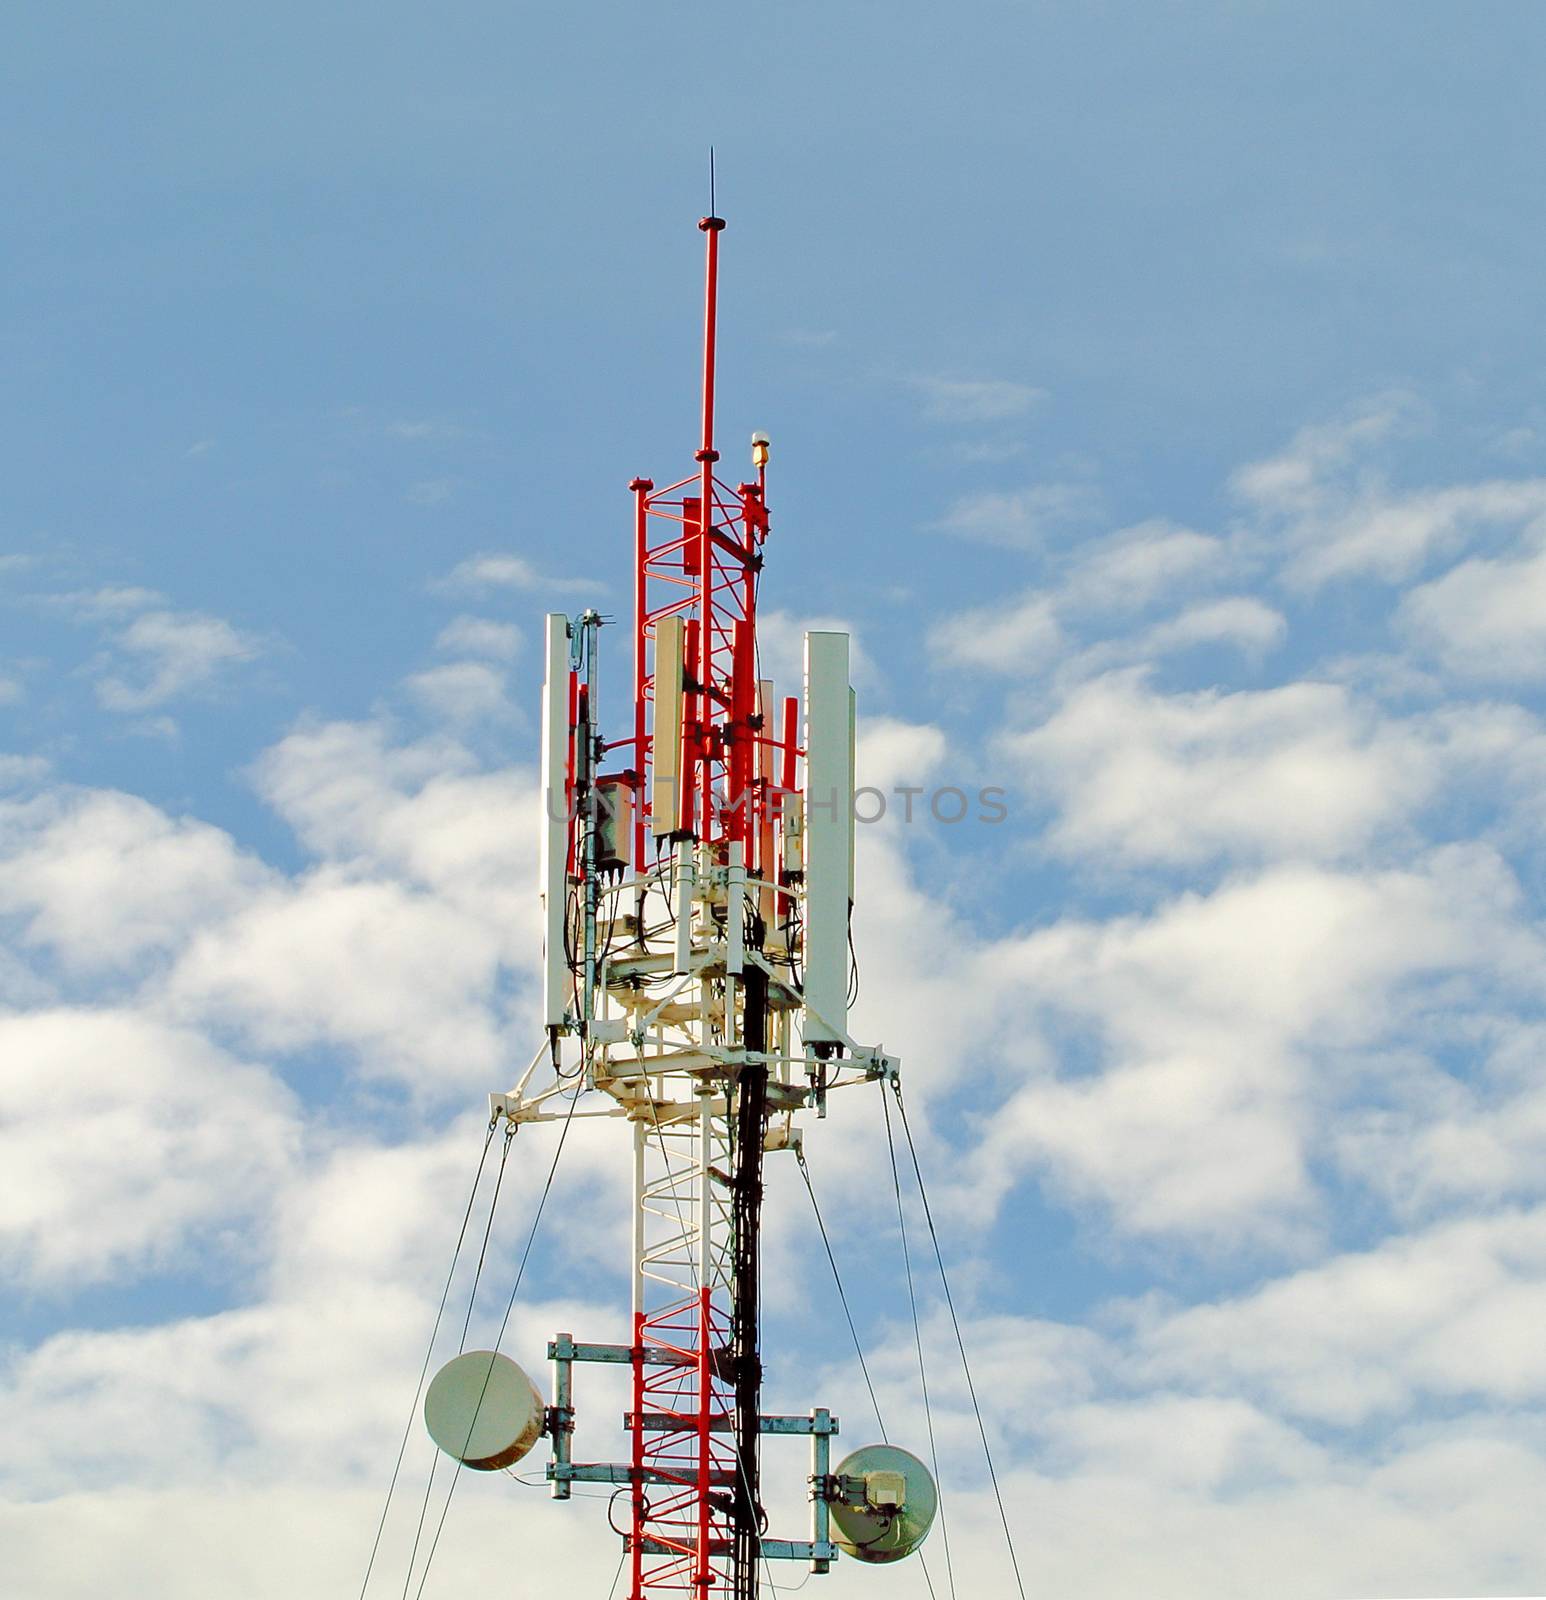 Antenna Tower of Communication by sommai